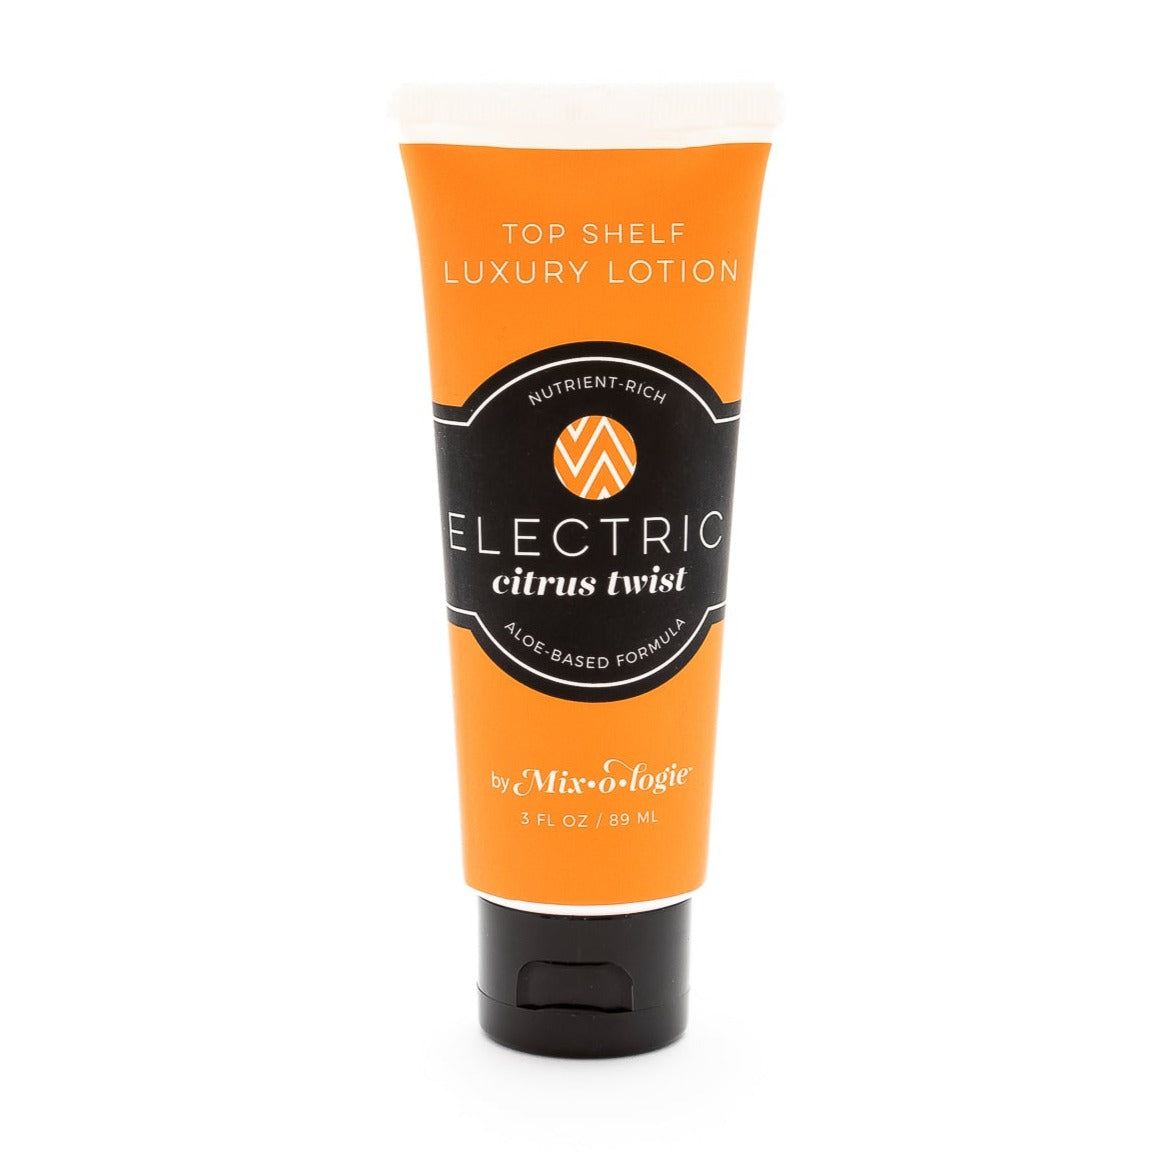 Mixologie's top shelf luxury lotion scented with Electric (citrus twist) in 3 mL plastic tube. 